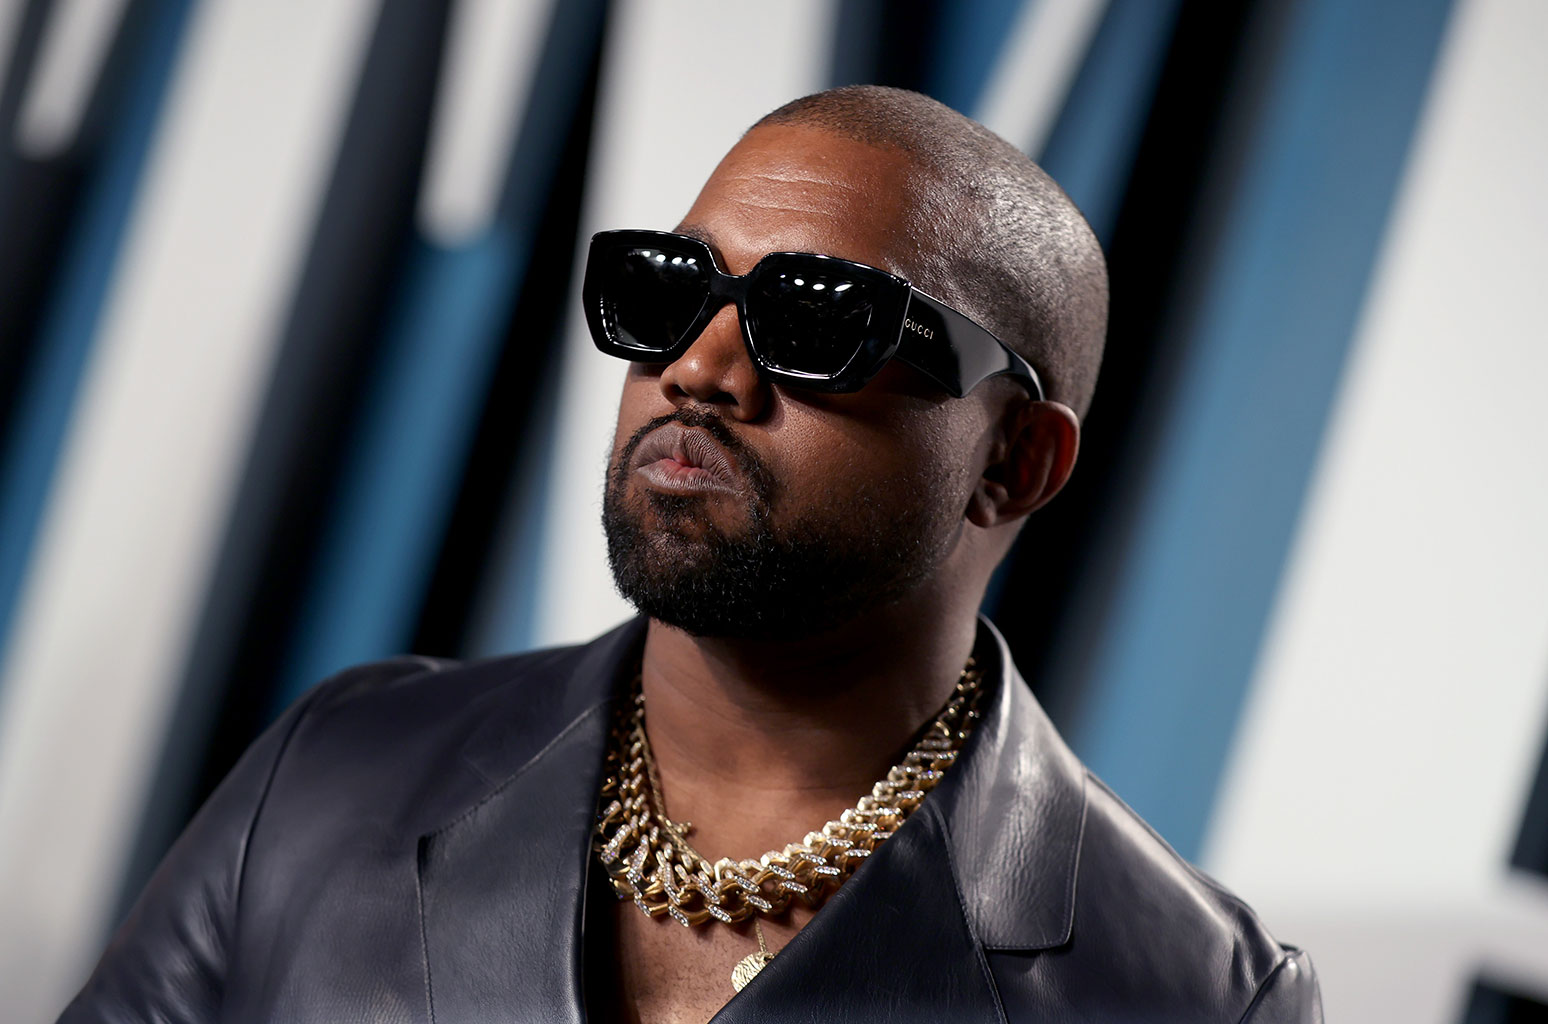 Artist Kanye West is ready to release a new album this Tuesday along